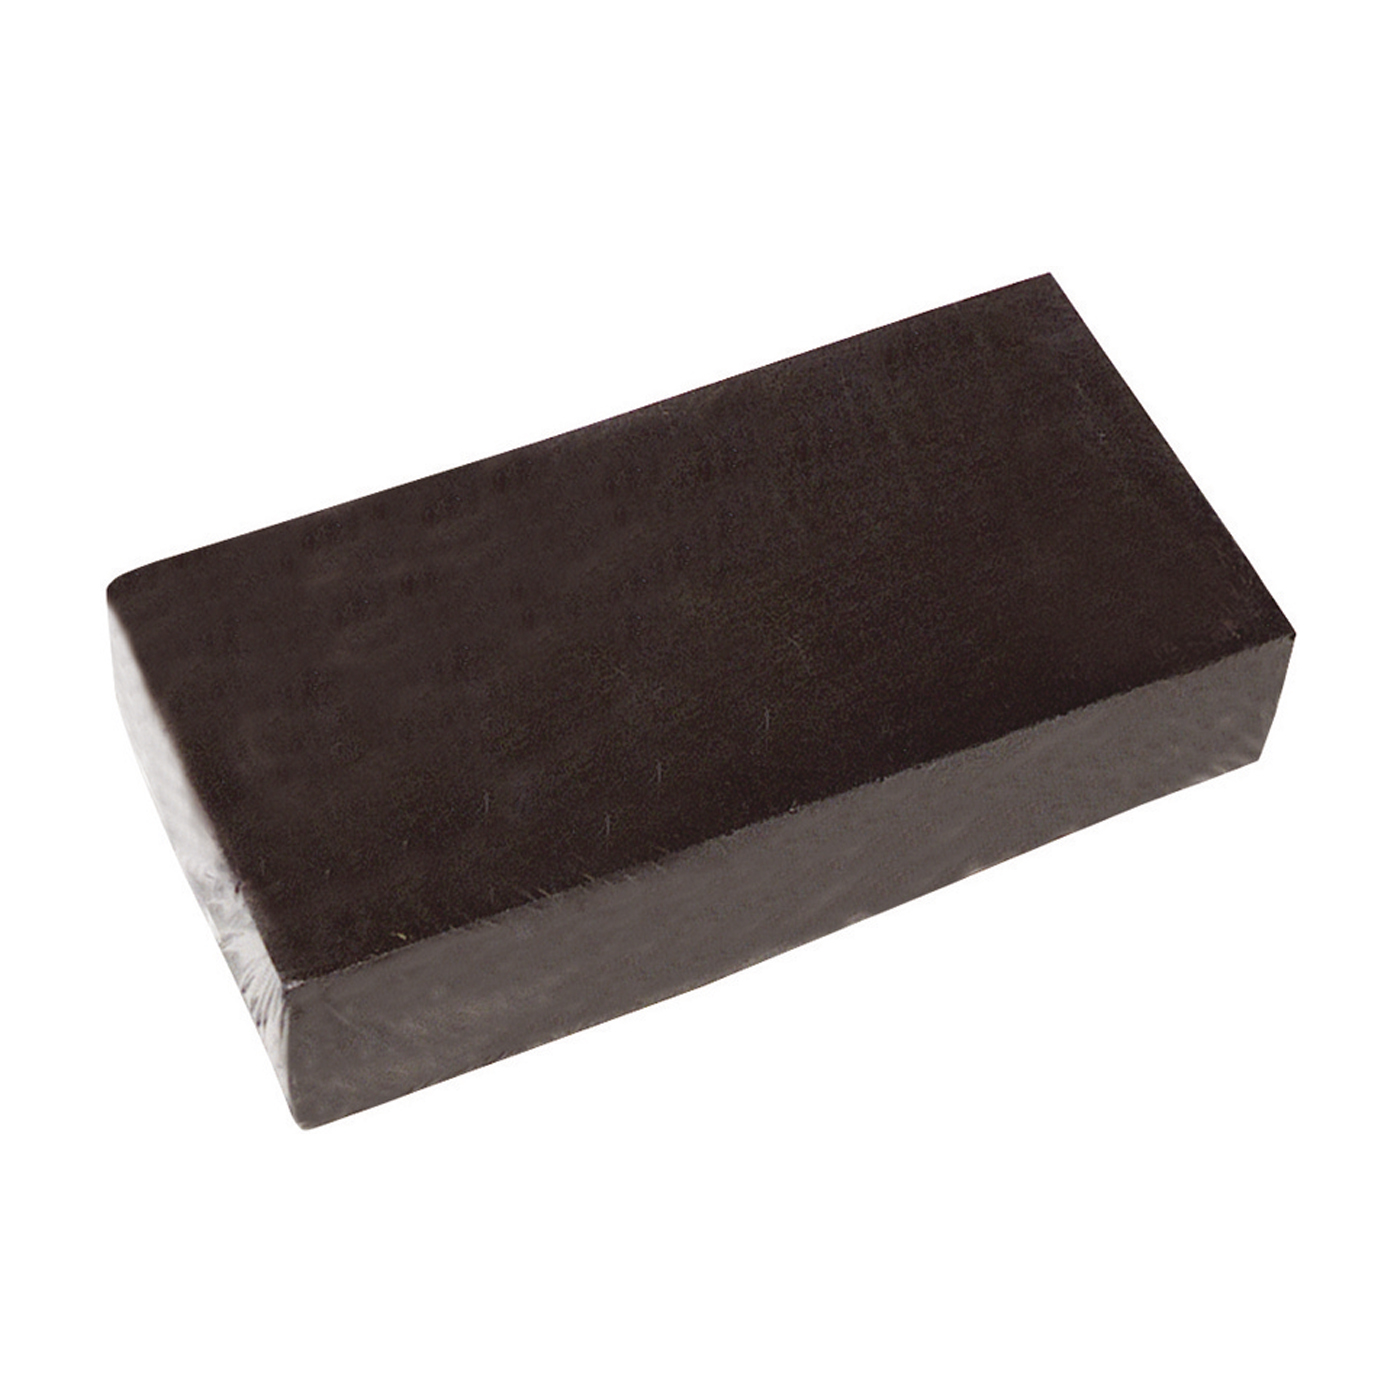 Charcoal for Soldering, Natural, Finest Quality,140x70x30 mm - 1 piece